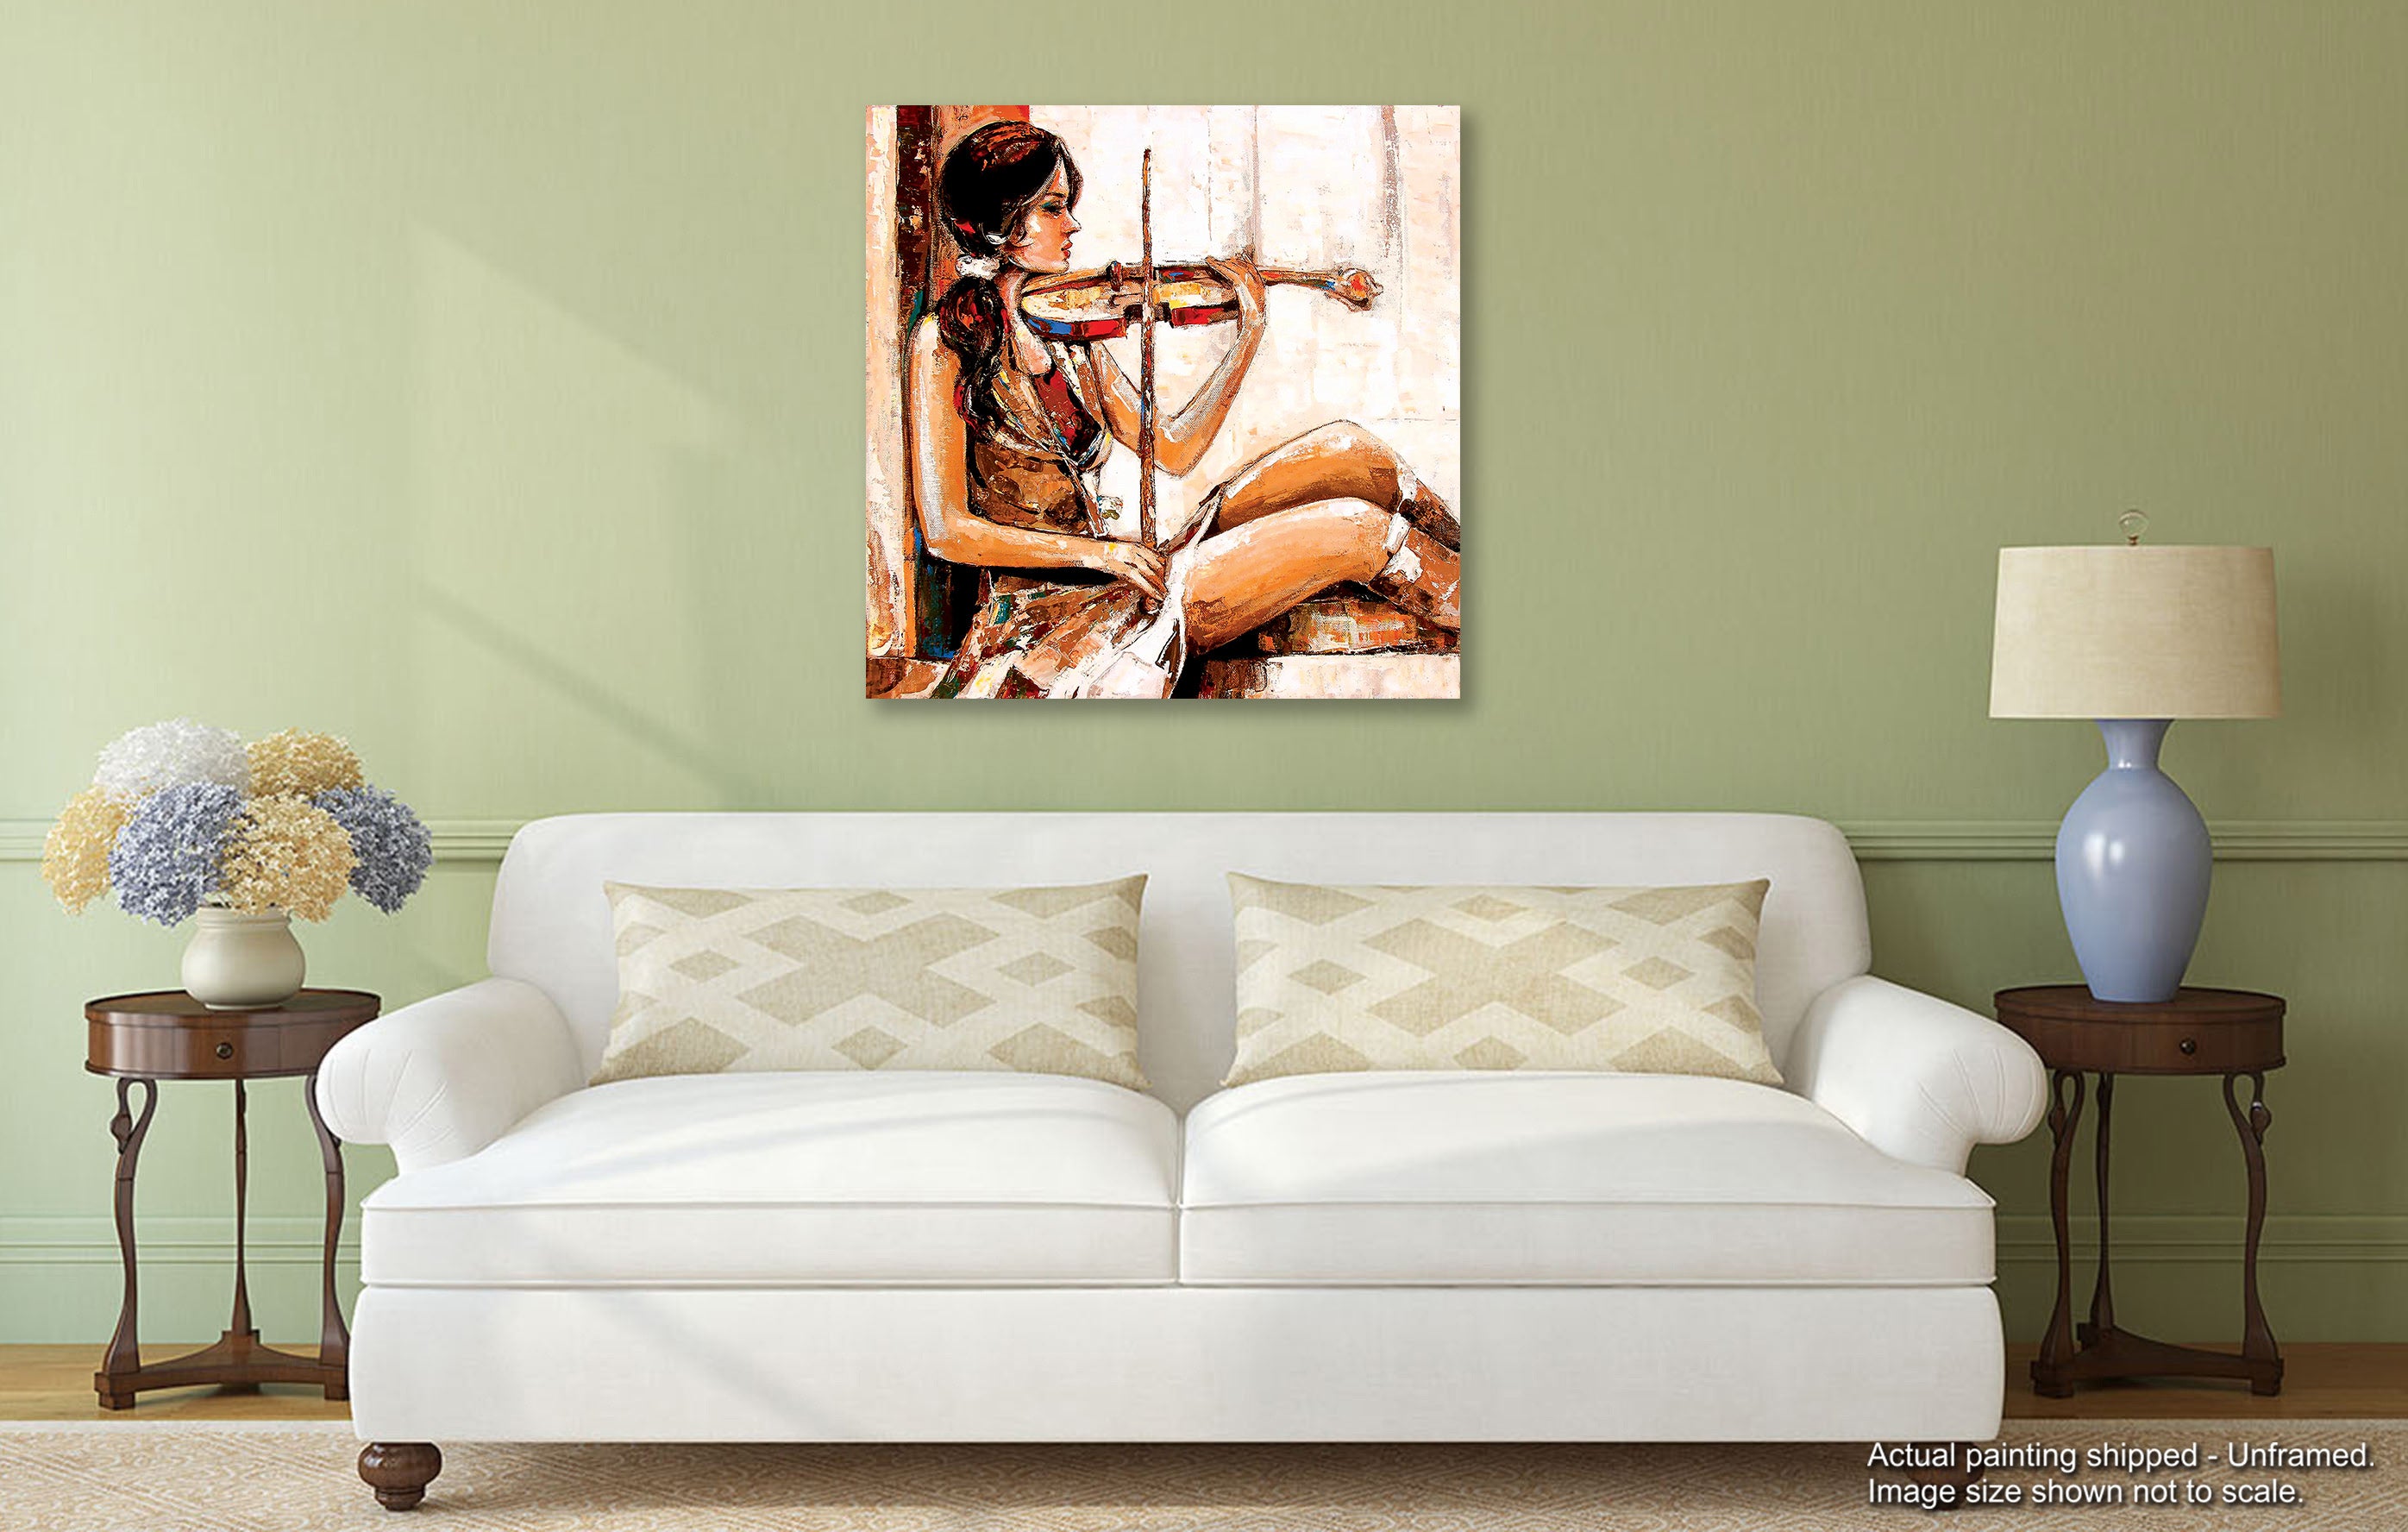 A Girl With Own Thought - Unframed Canvas Painting